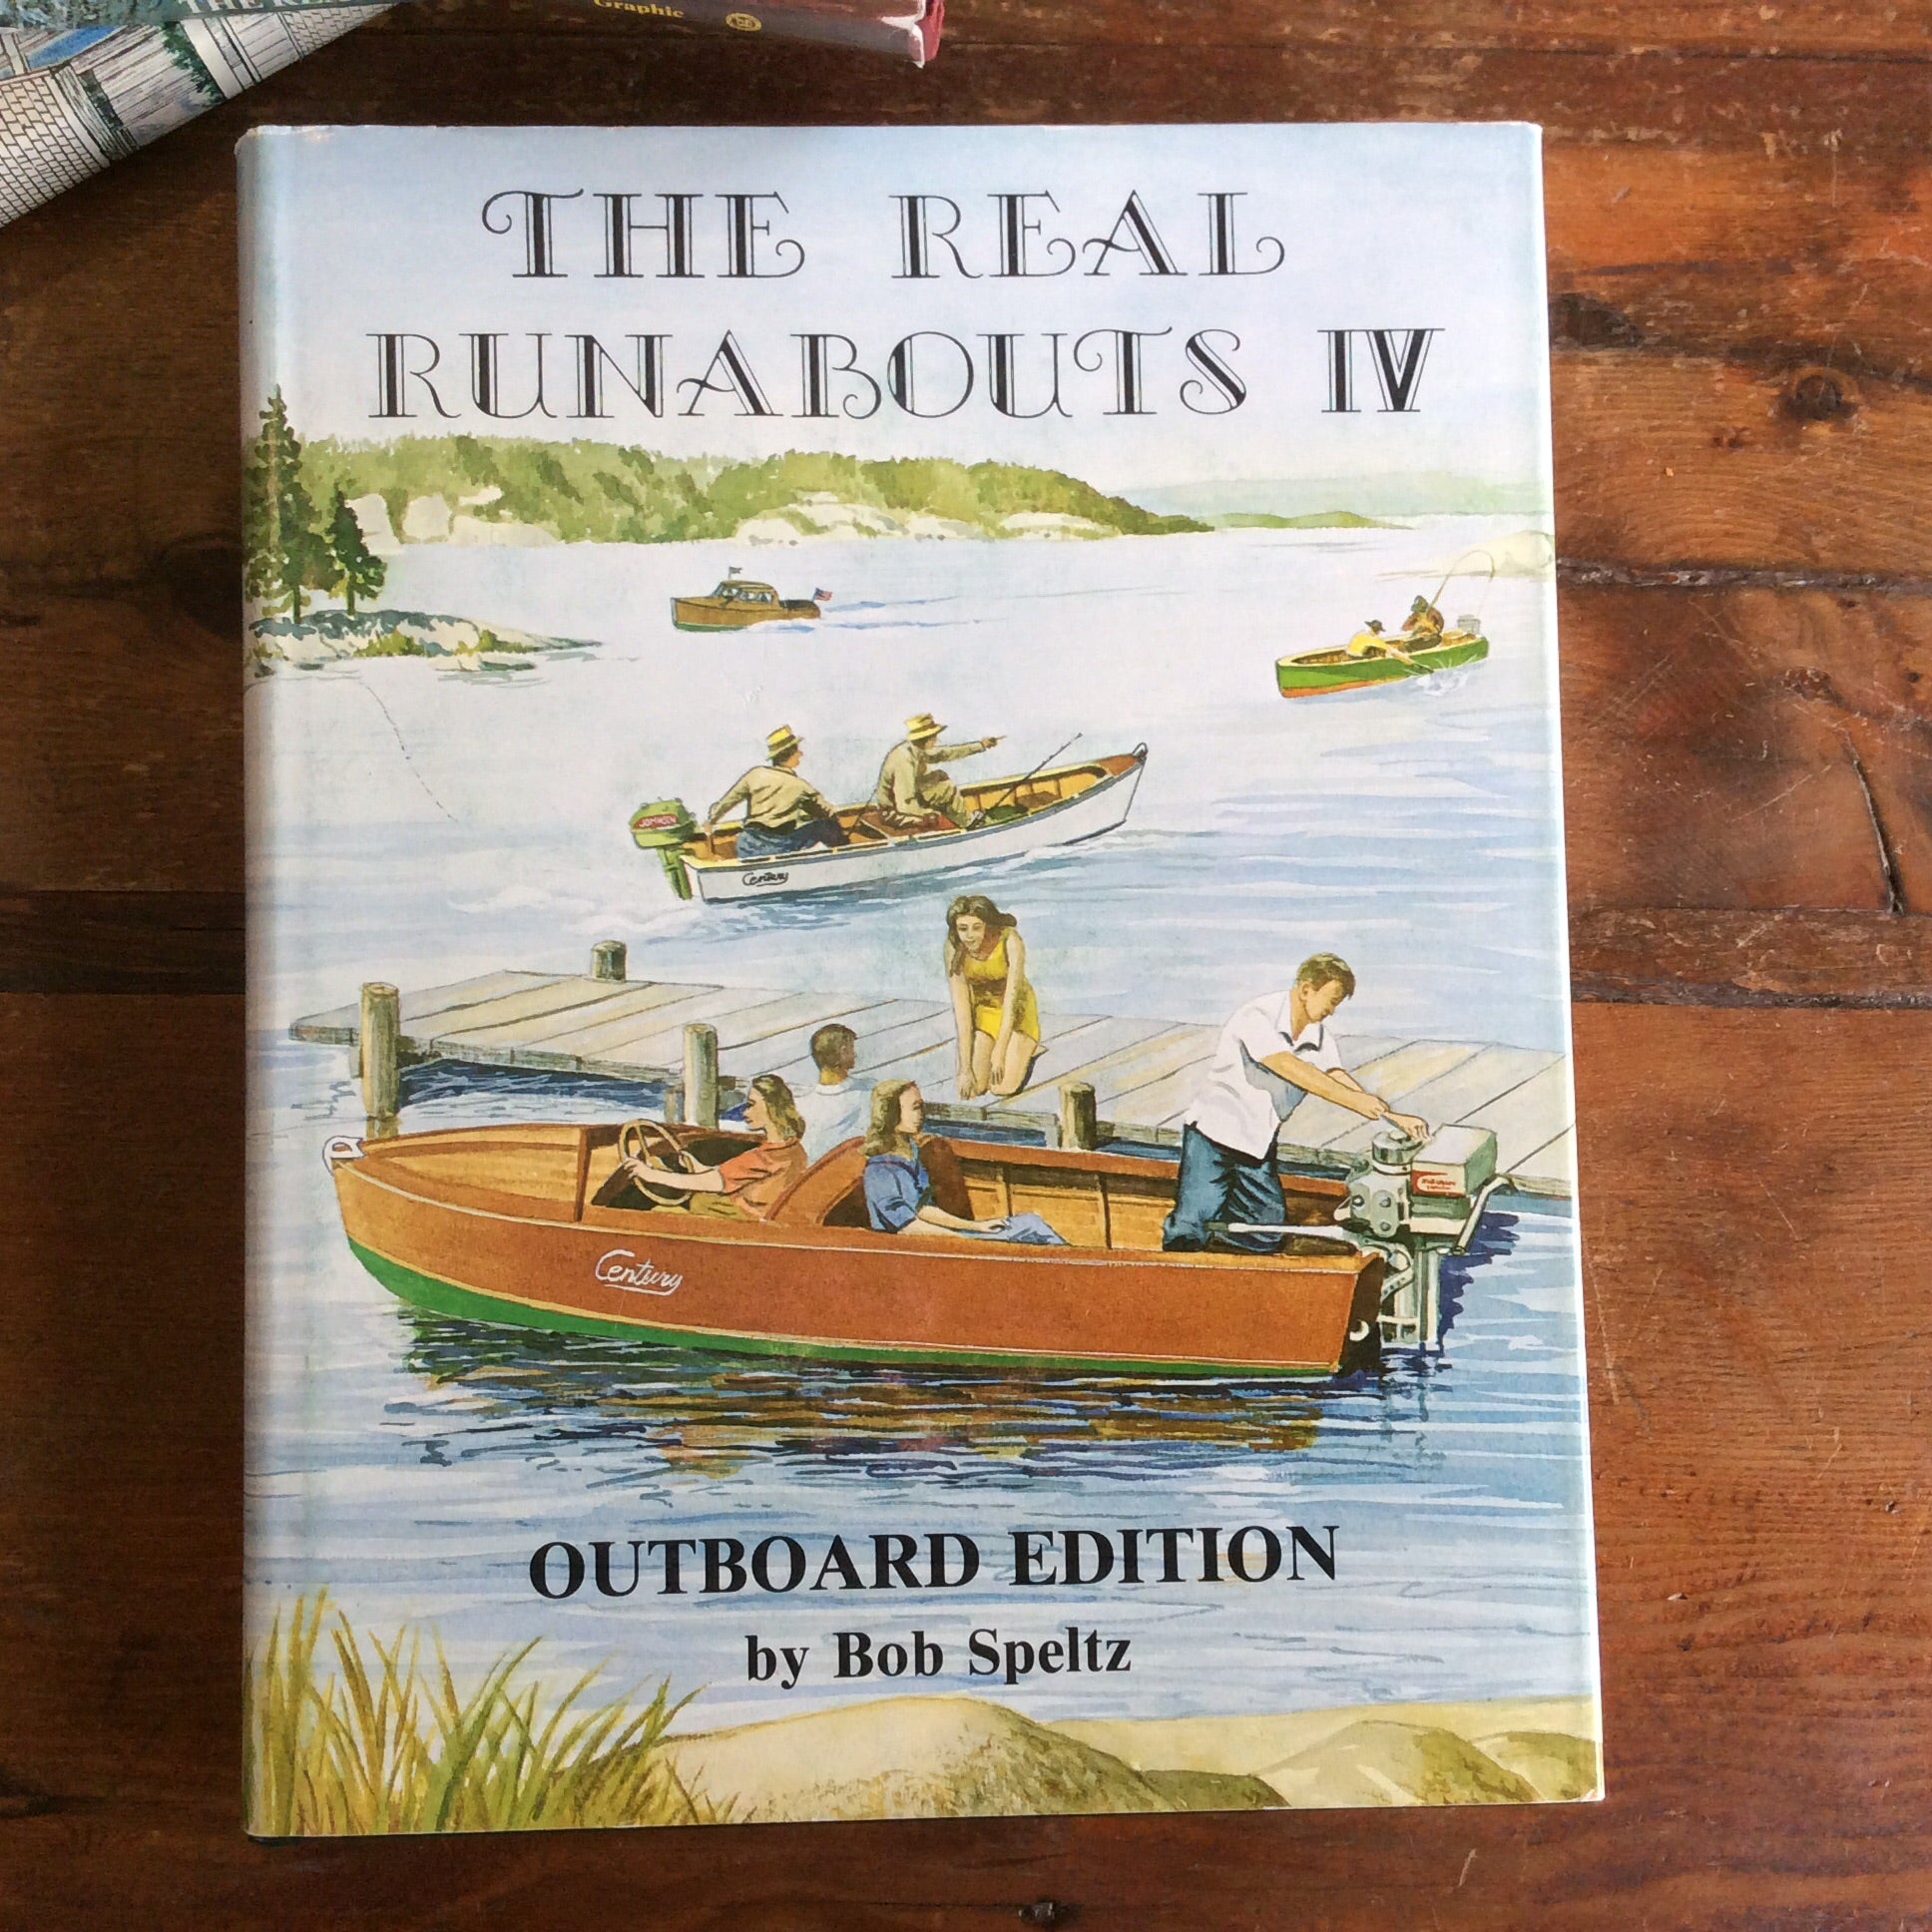 Book: "The Real Runabouts, Volume IV, Outboard Edition" Signed copy - Annapolis Maritime Antiques